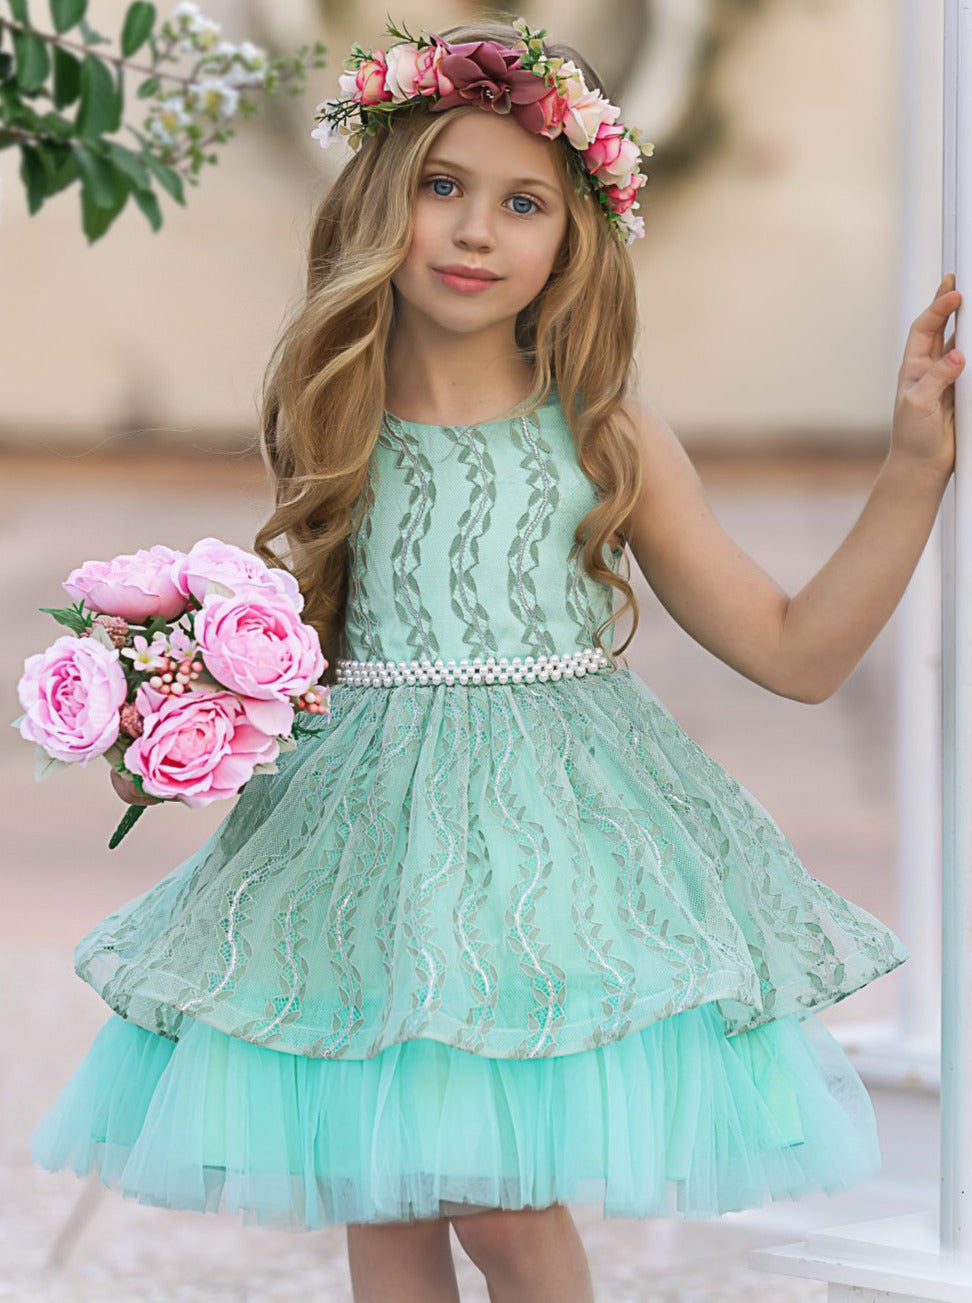 Toddler Spring Dresses | Girls Embroidered Pearl Detail Party Dress ...